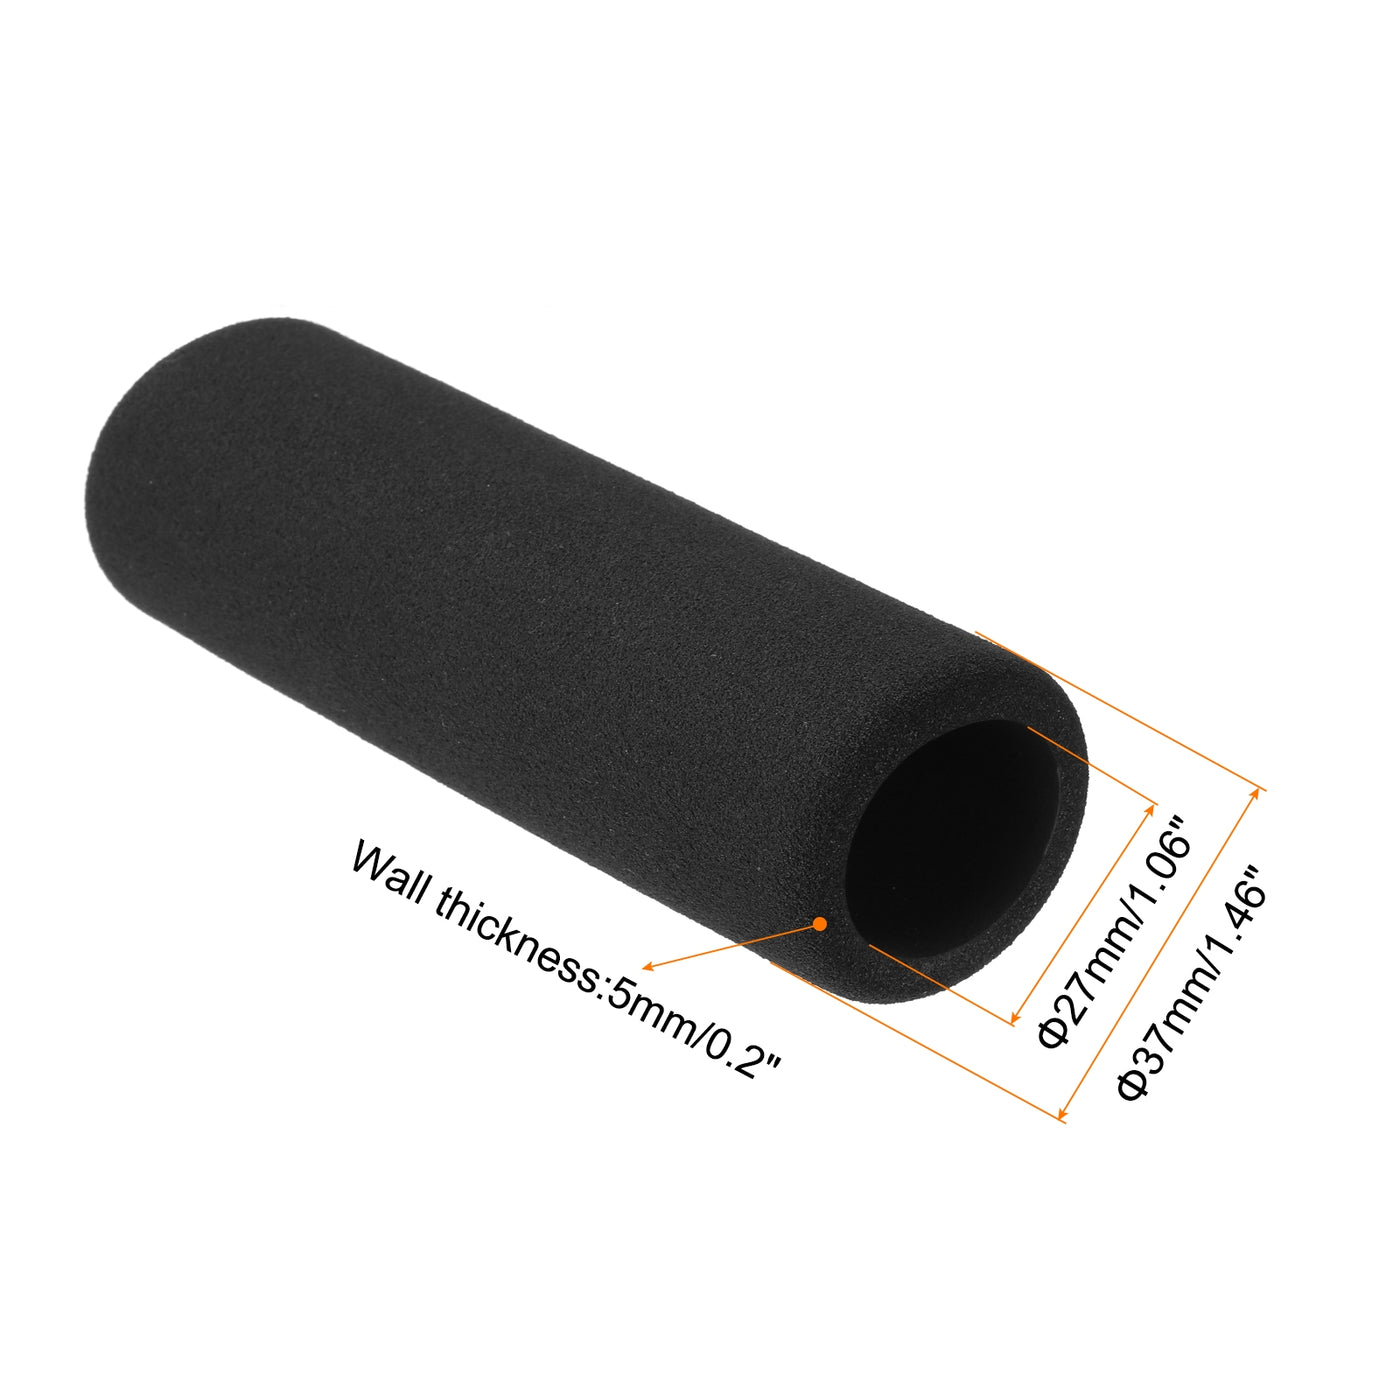 uxcell Uxcell Pipe Insulation Tube Foam Tubing for Handle Grip Support 27mm ID 37mm OD 116mm Heat Preservation Black 2pcs